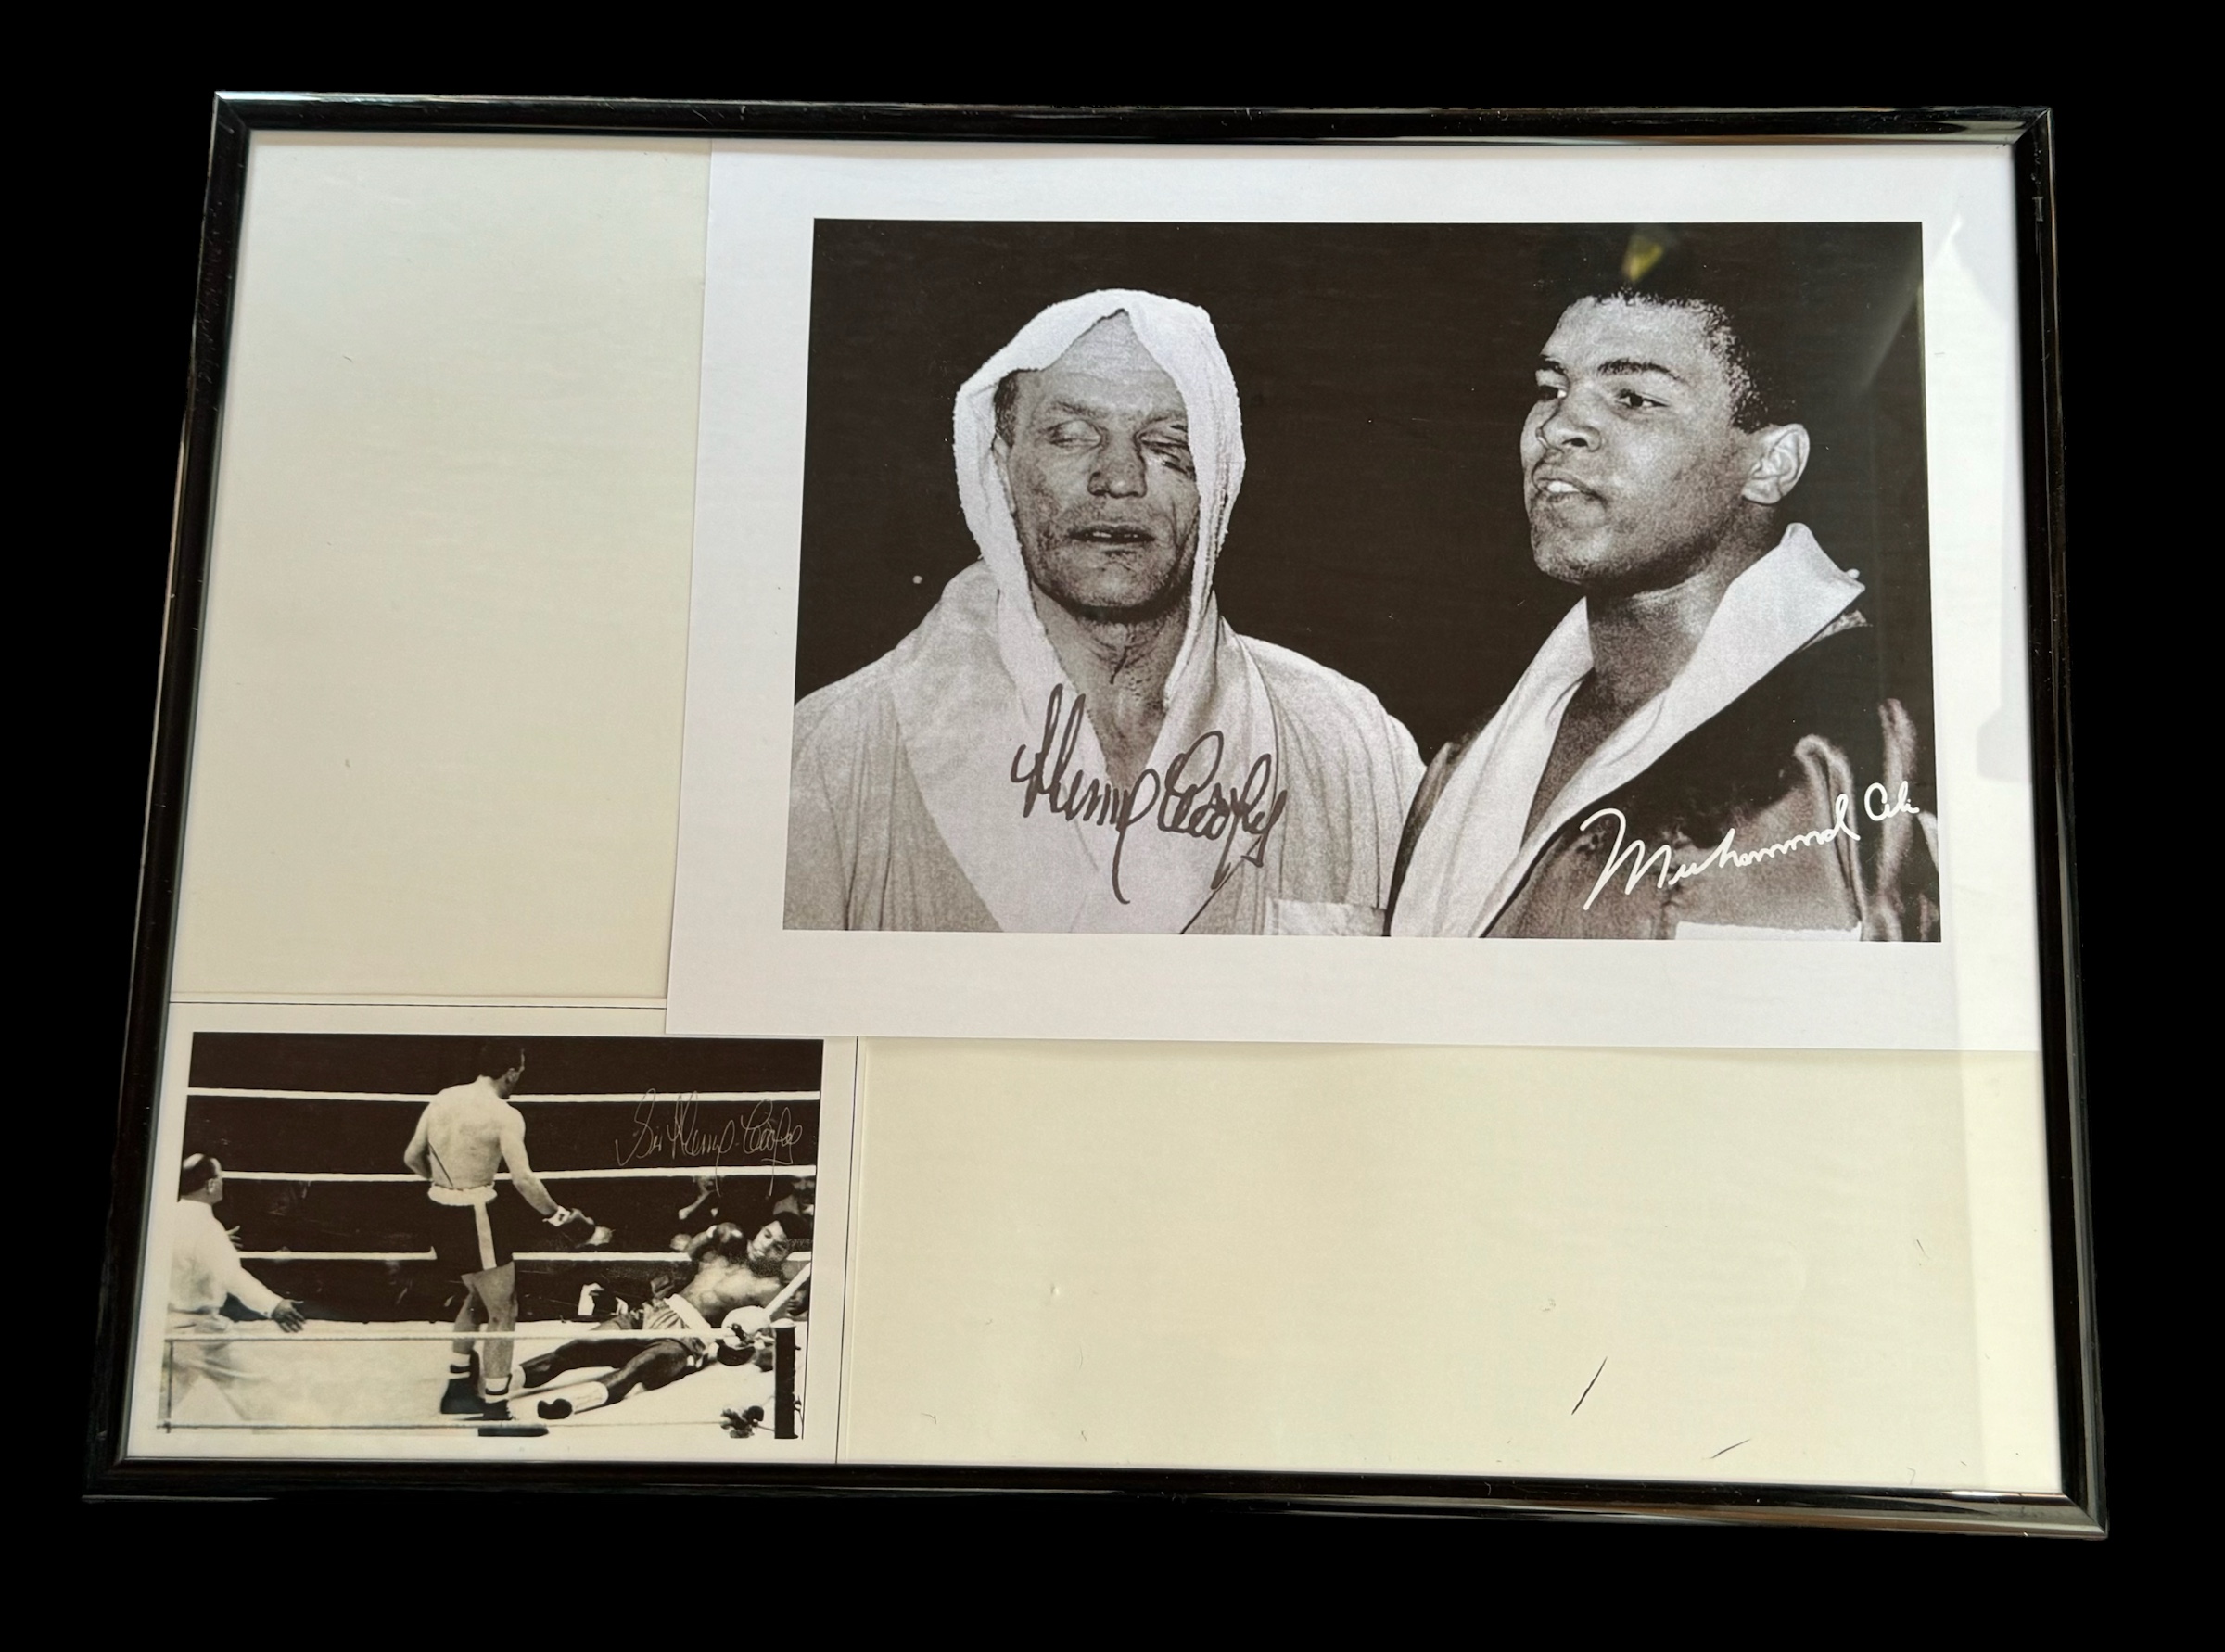 Henry Cooper and Muhammad Ali 16x12 inch overall framed black and white signature display. Good